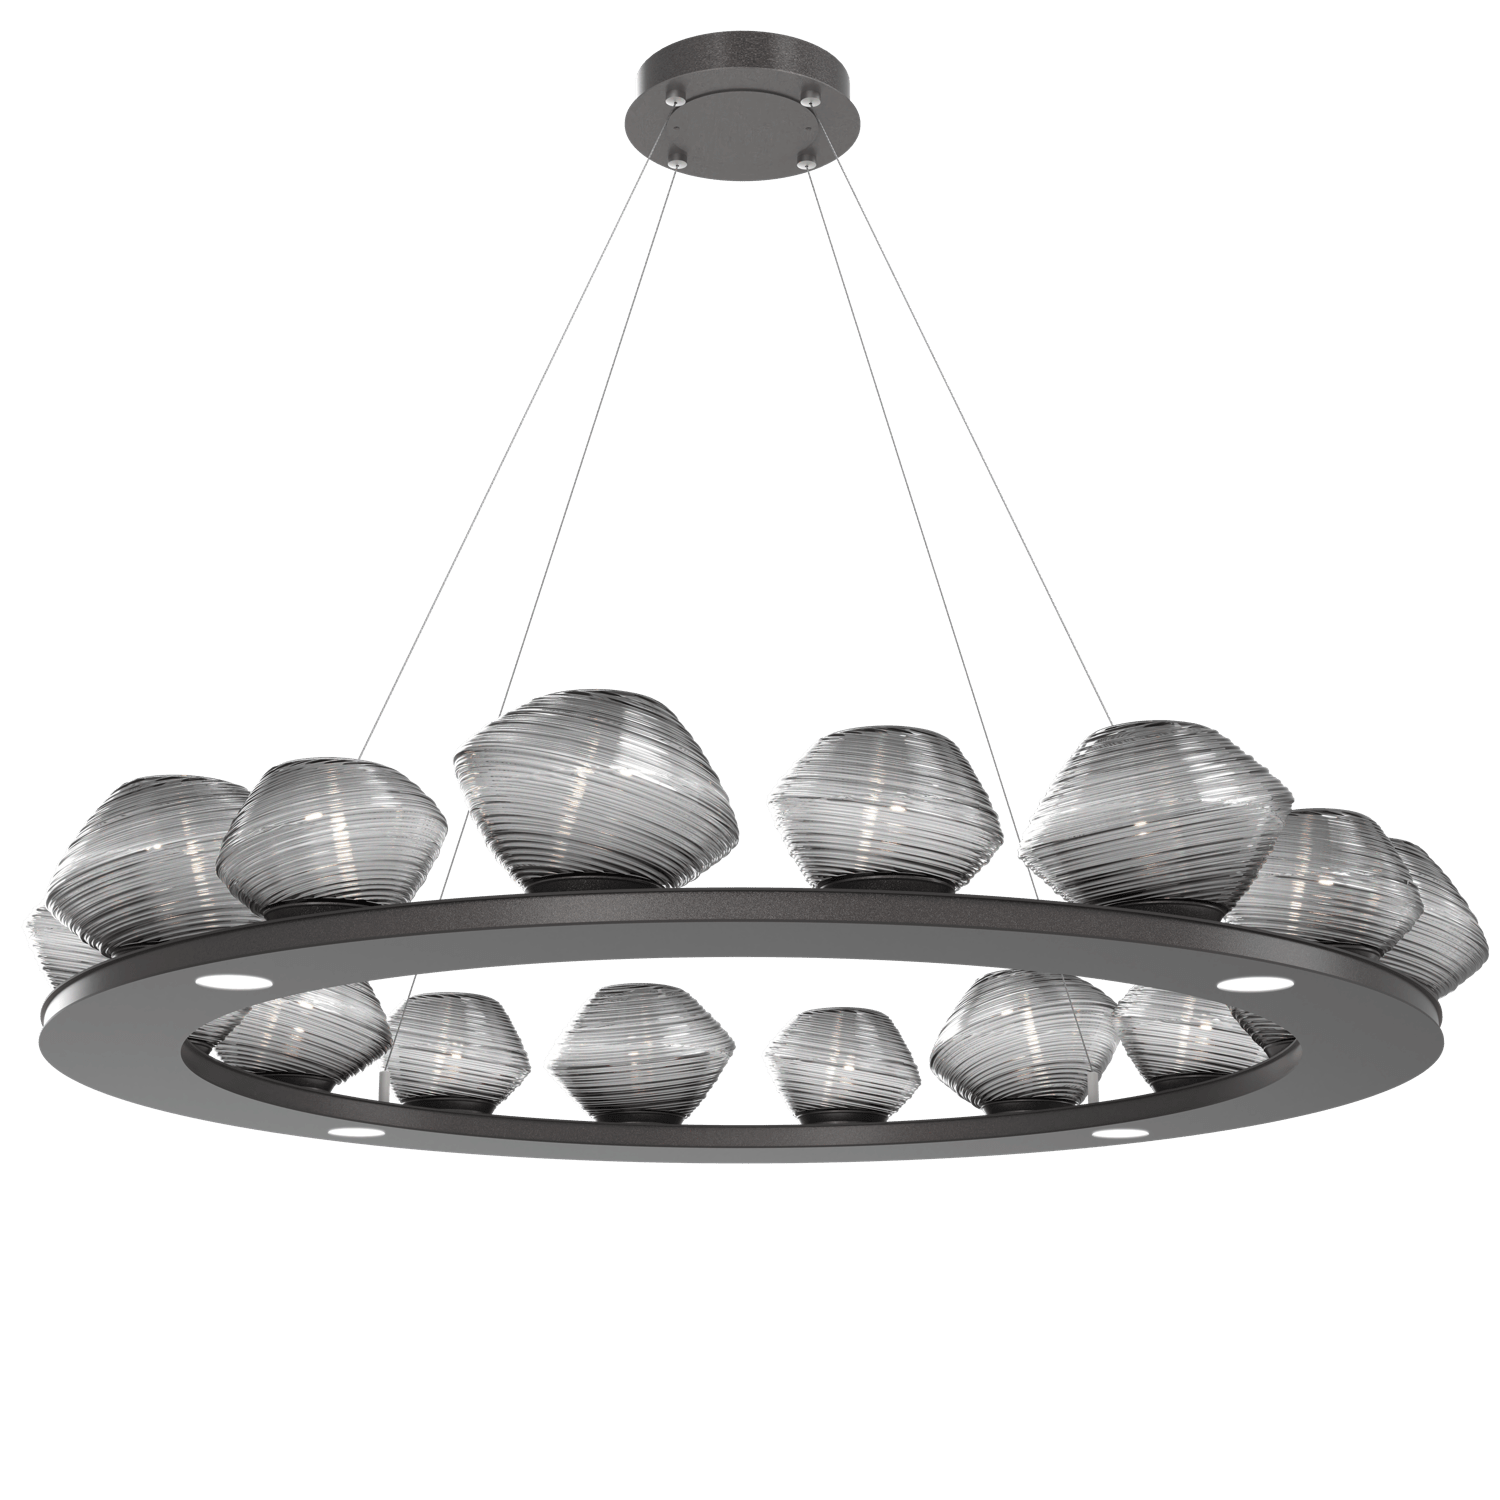 CHB0089-0D-GP-S-Hammerton-Studio-Mesa-48-inch-ring-chandelier-with-graphite-finish-and-smoke-blown-glass-shades-and-LED-lamping